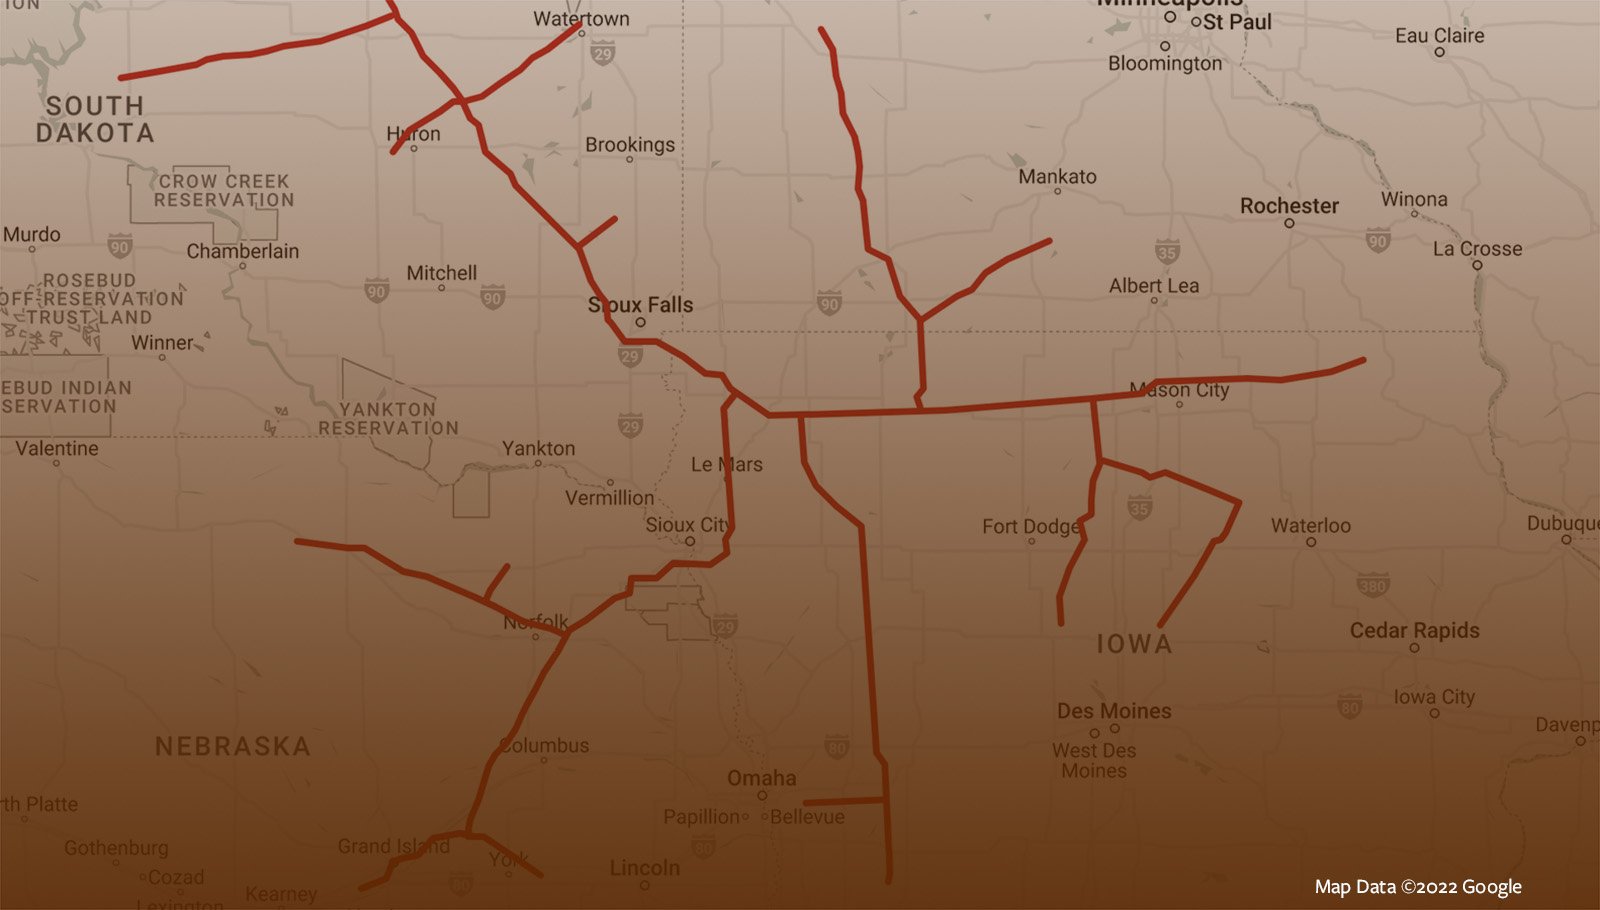 Map tracing pipeline in red overlayed on Midwestern states